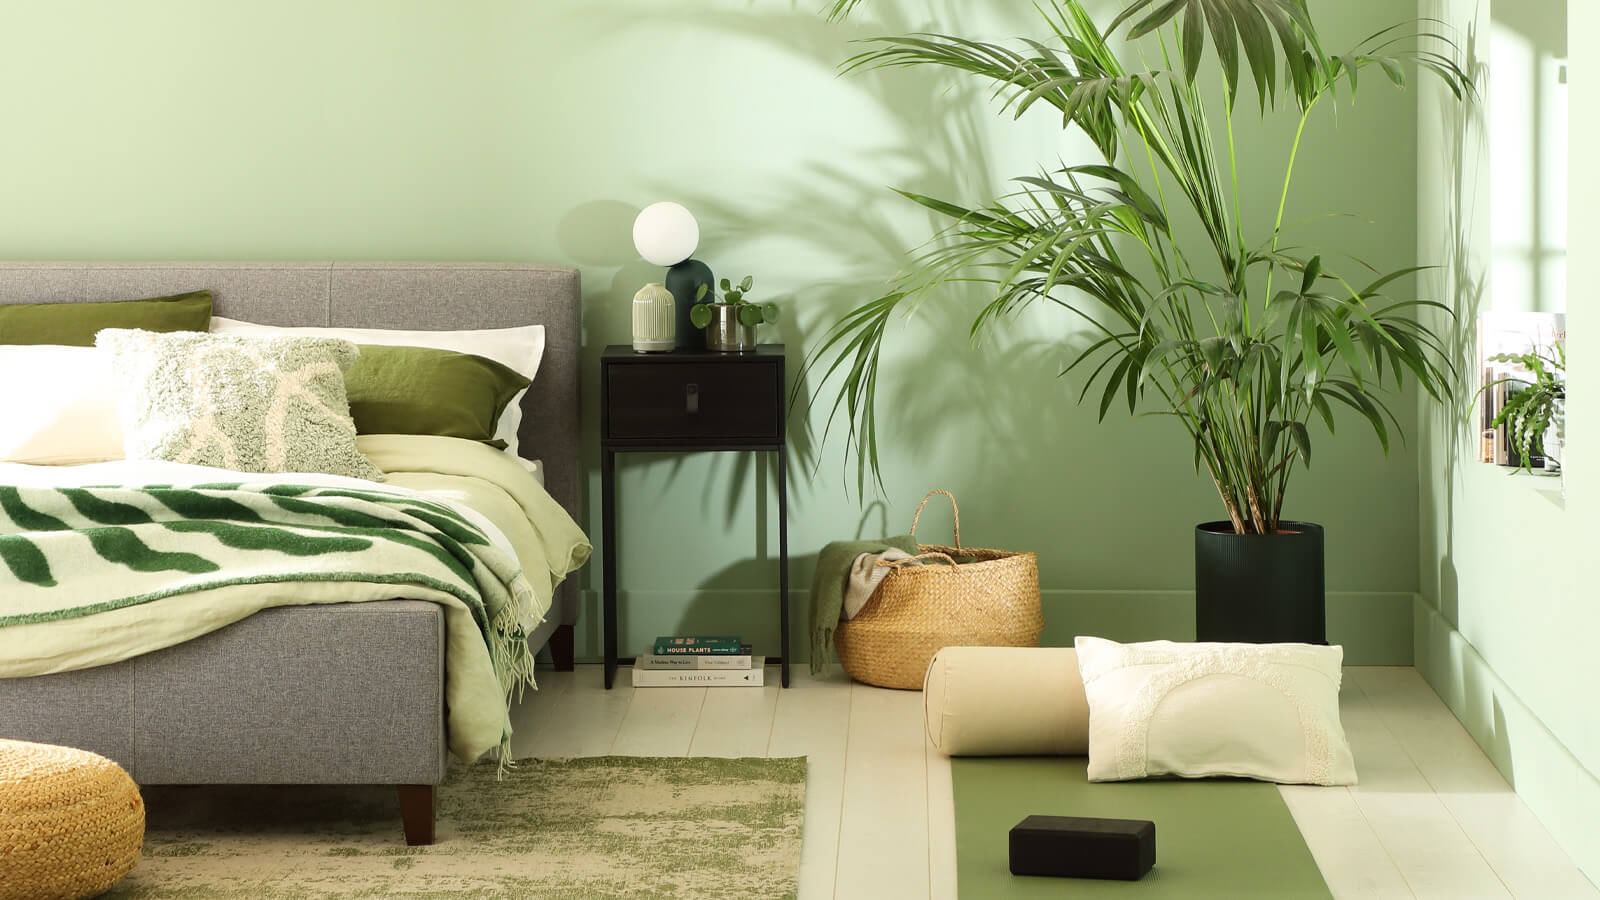 https://www.furniturechoice.co.uk/v5/img/hier/advice-and-inspiration/banner-7-ways-to-make-a-green-bedroom-look-good-l.jpg